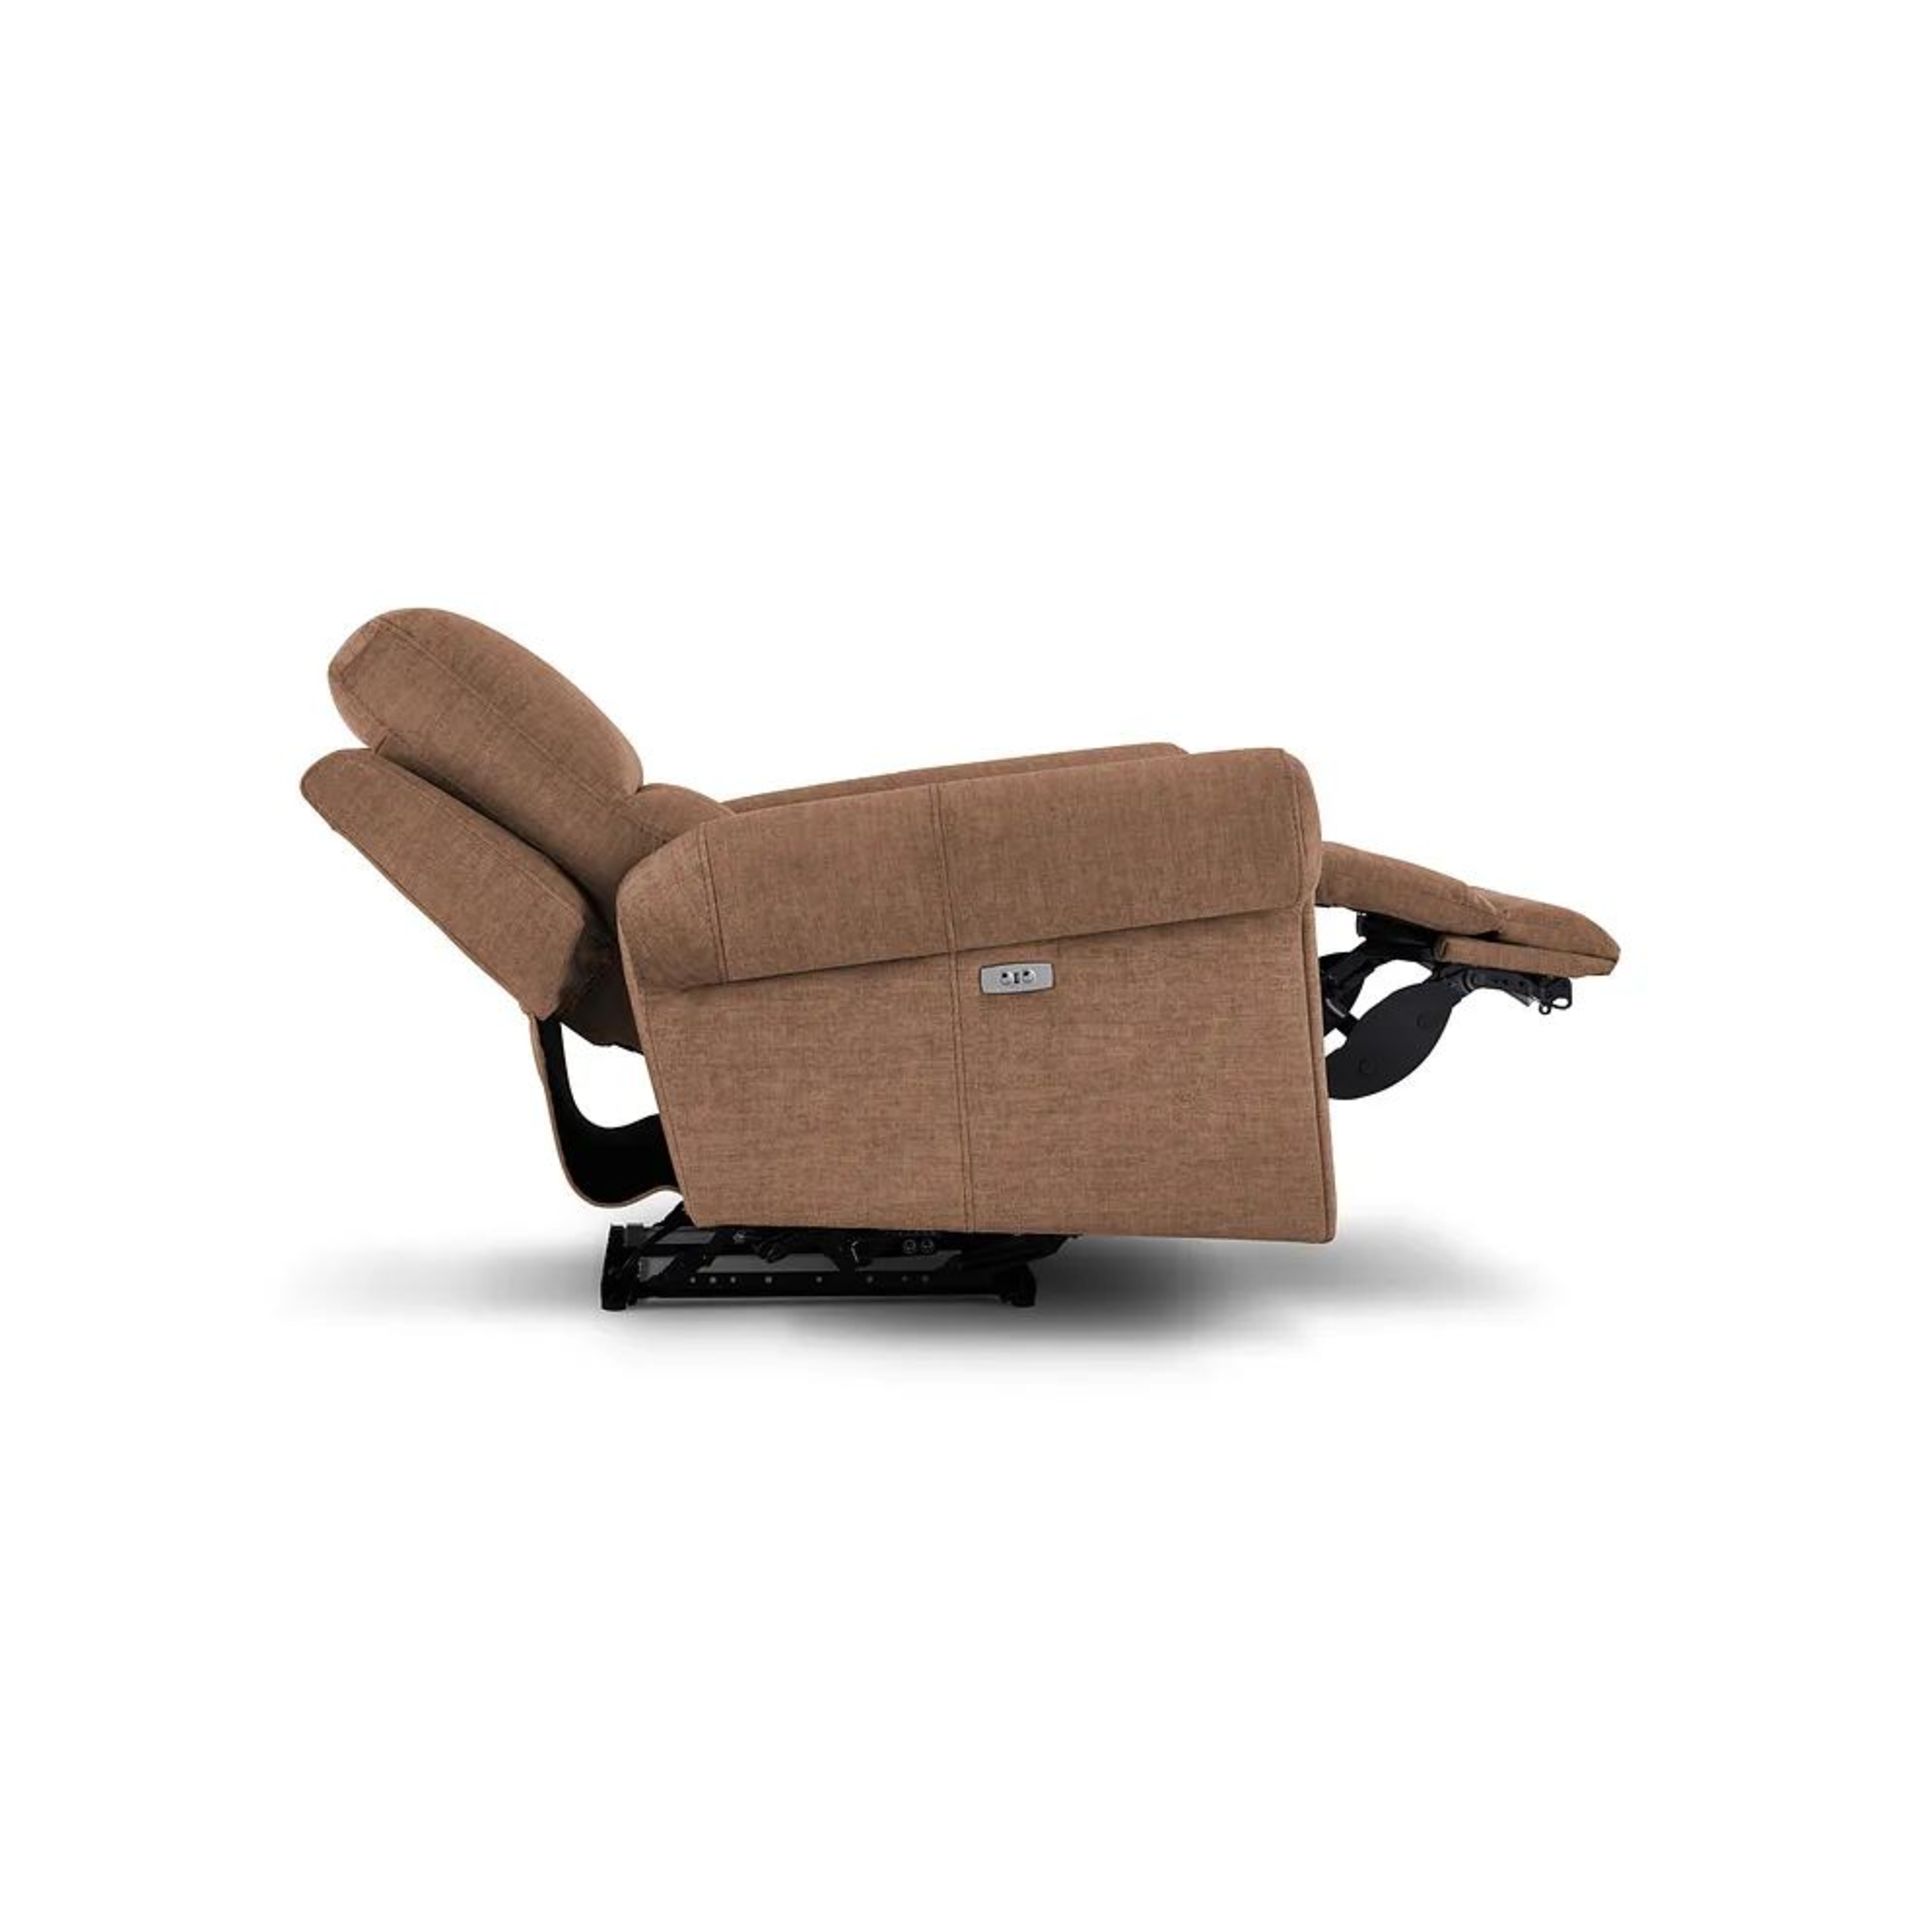 BRAND NEW COLORADO Electric Recliner Armchair - PLUSH BROWN FABRIC. RRP £799. Shown here in Plush - Image 7 of 11